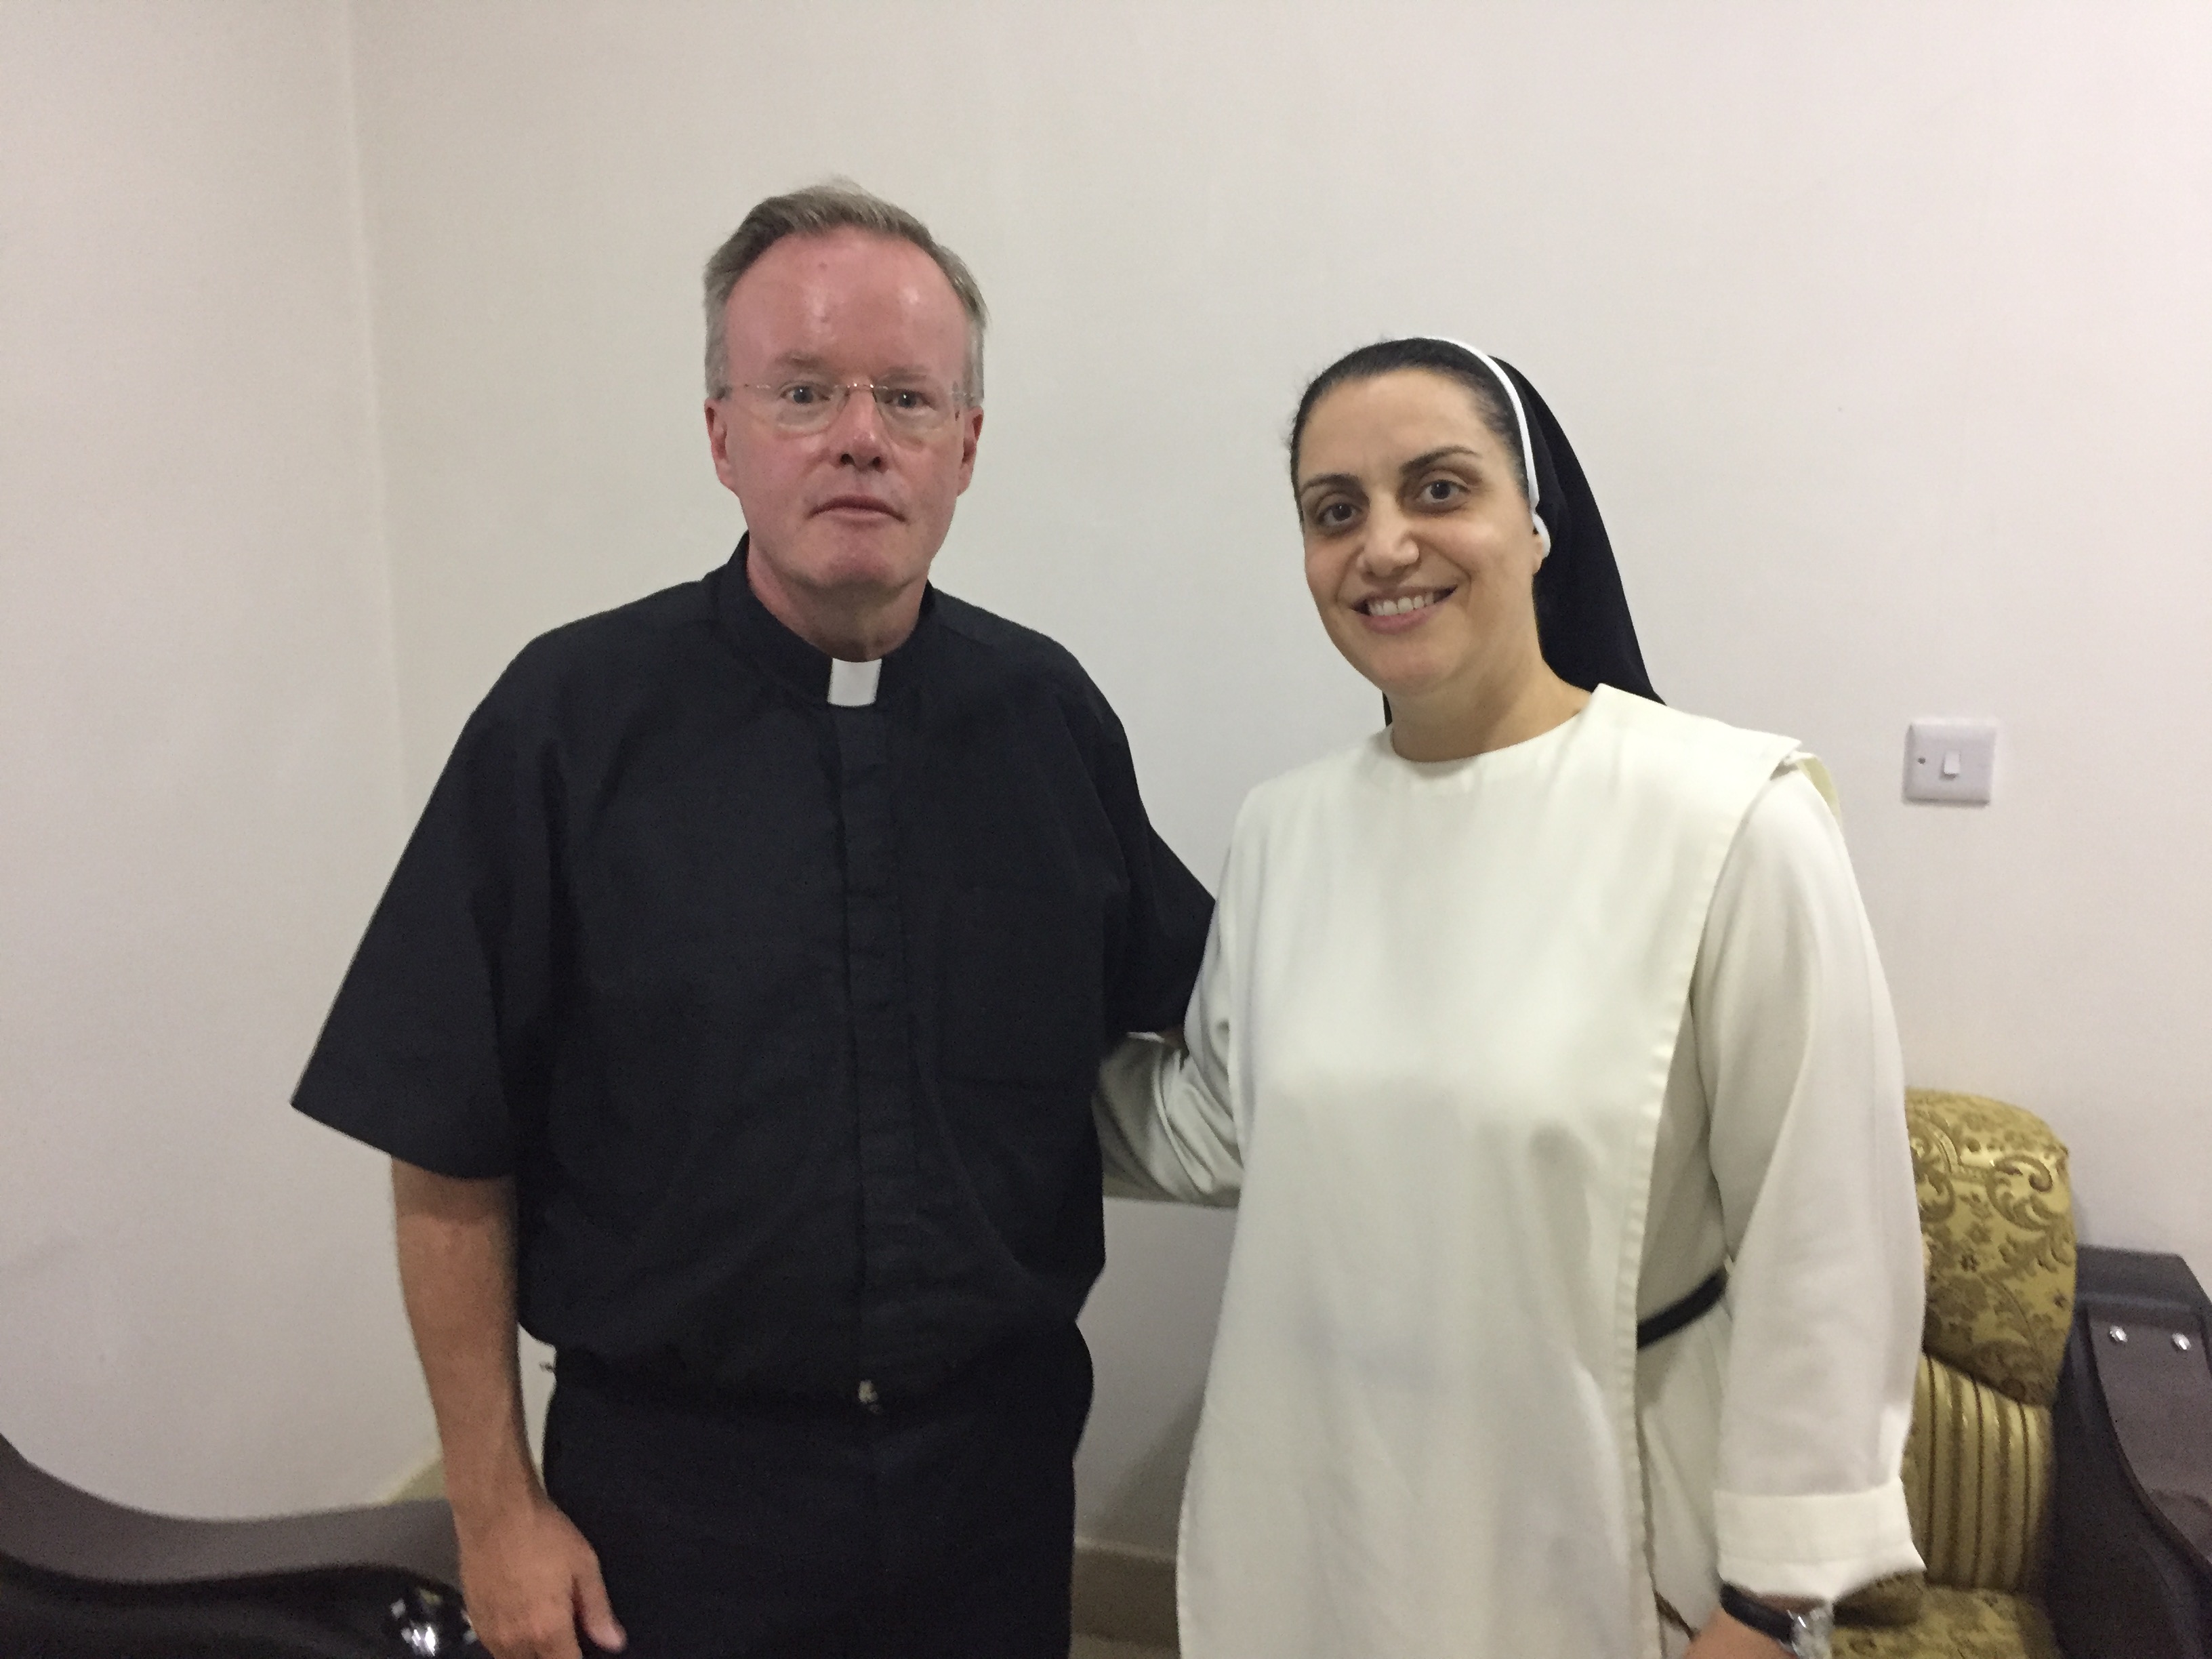 Home Office reopens visa application of Iraqi nun denied entry to UK 